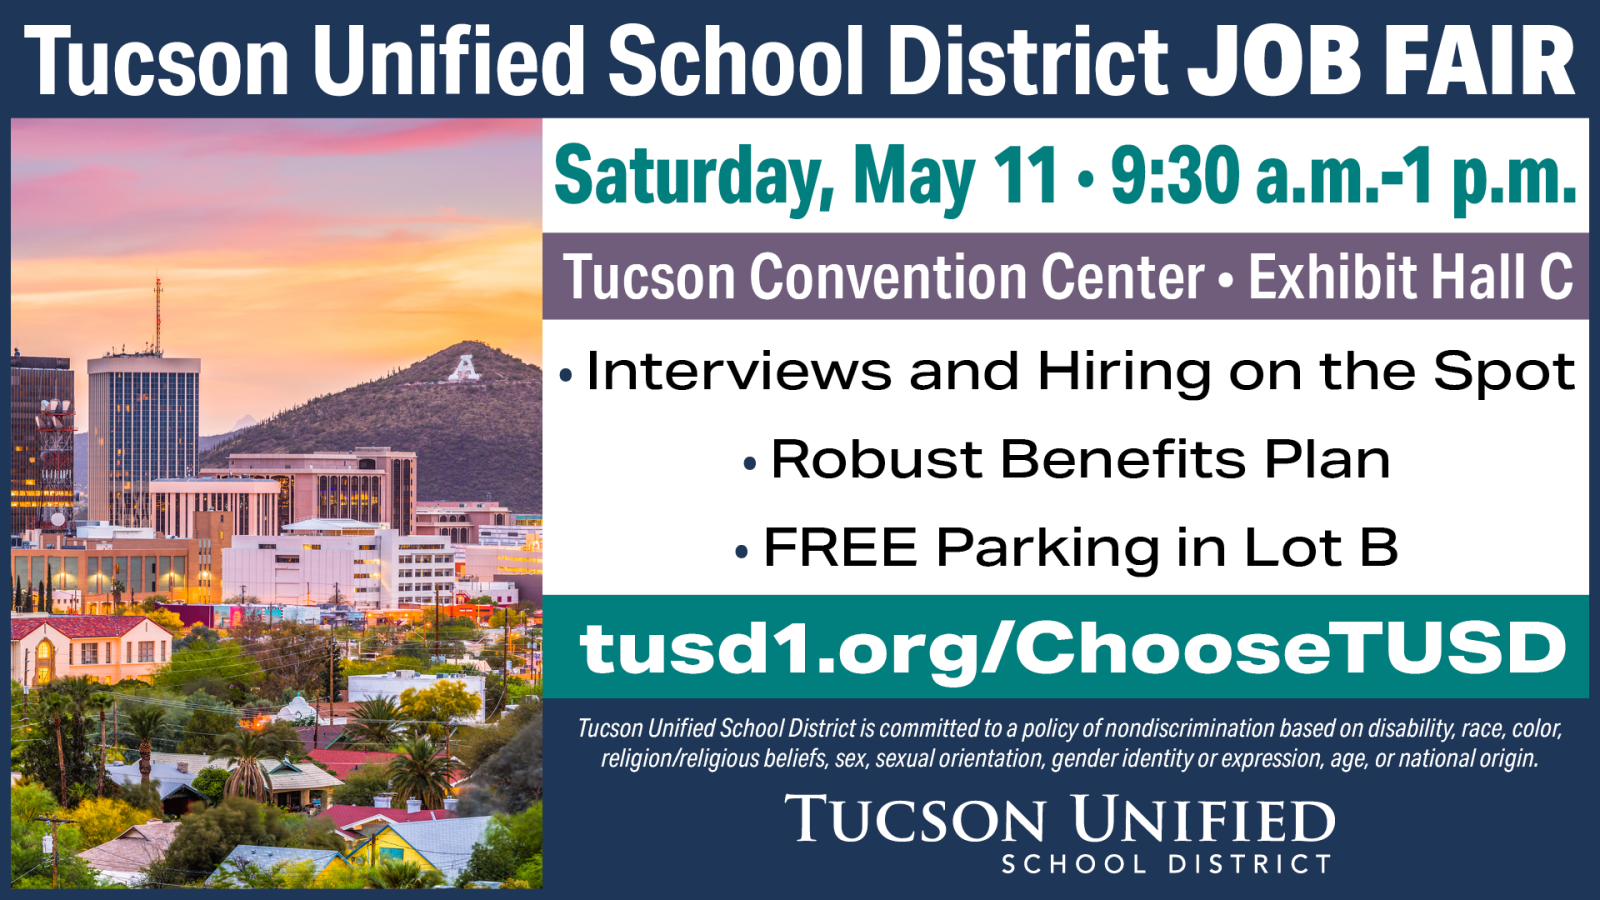 Tucson Unified School District Job Fair | Saturday, May 11 9:30 am - 1 pm | Tucson Convention Center Exhibit Hall C | 260 S. Church Ave. | Interviews and Hiring on the Spot, Robust Benefits Plan, FREE Parking in Lot B